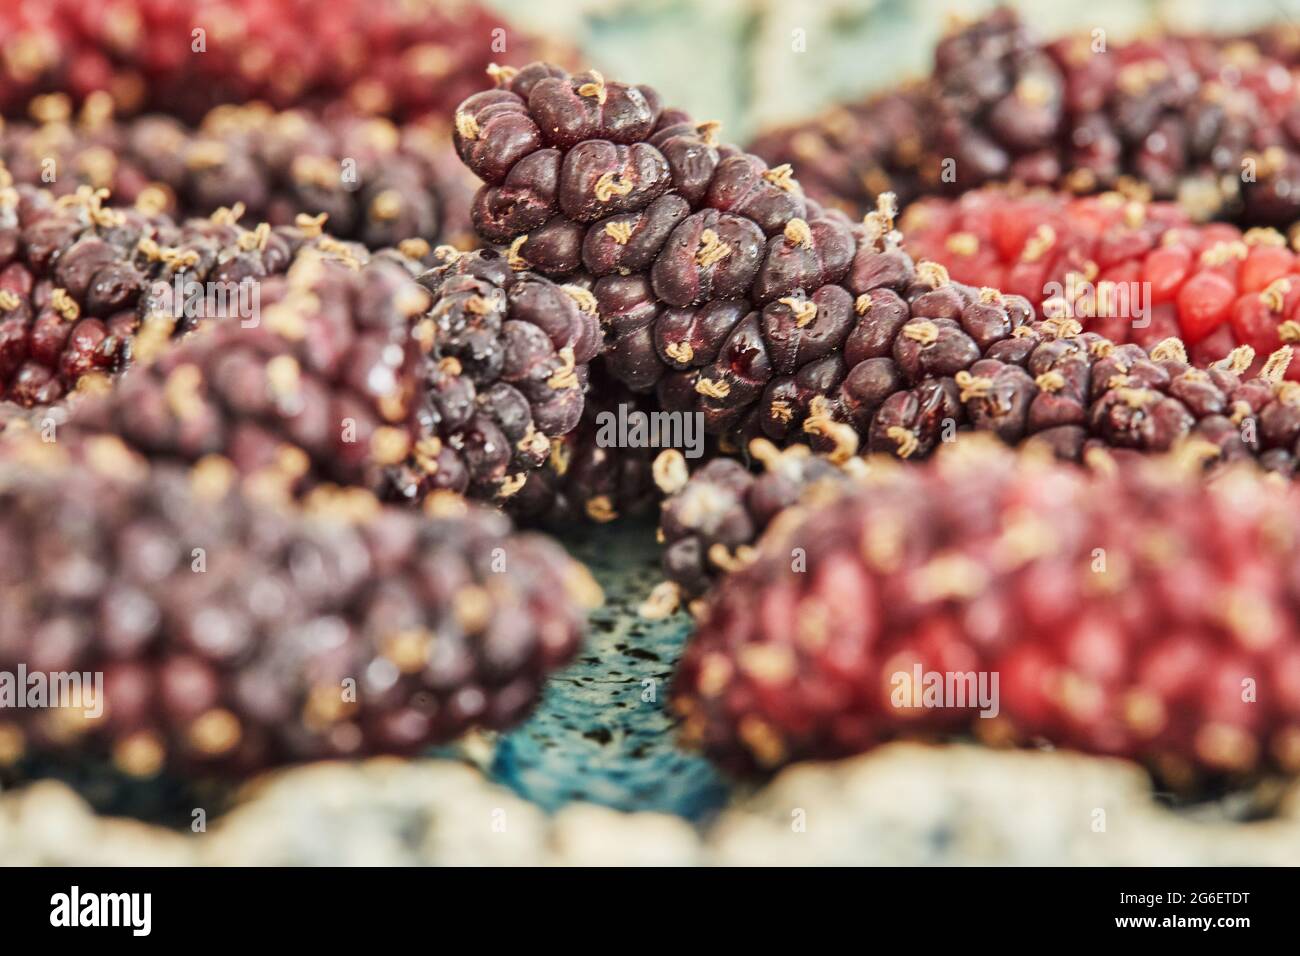 Afghan mulberry black and red lying on plate, close-up Stock Photo